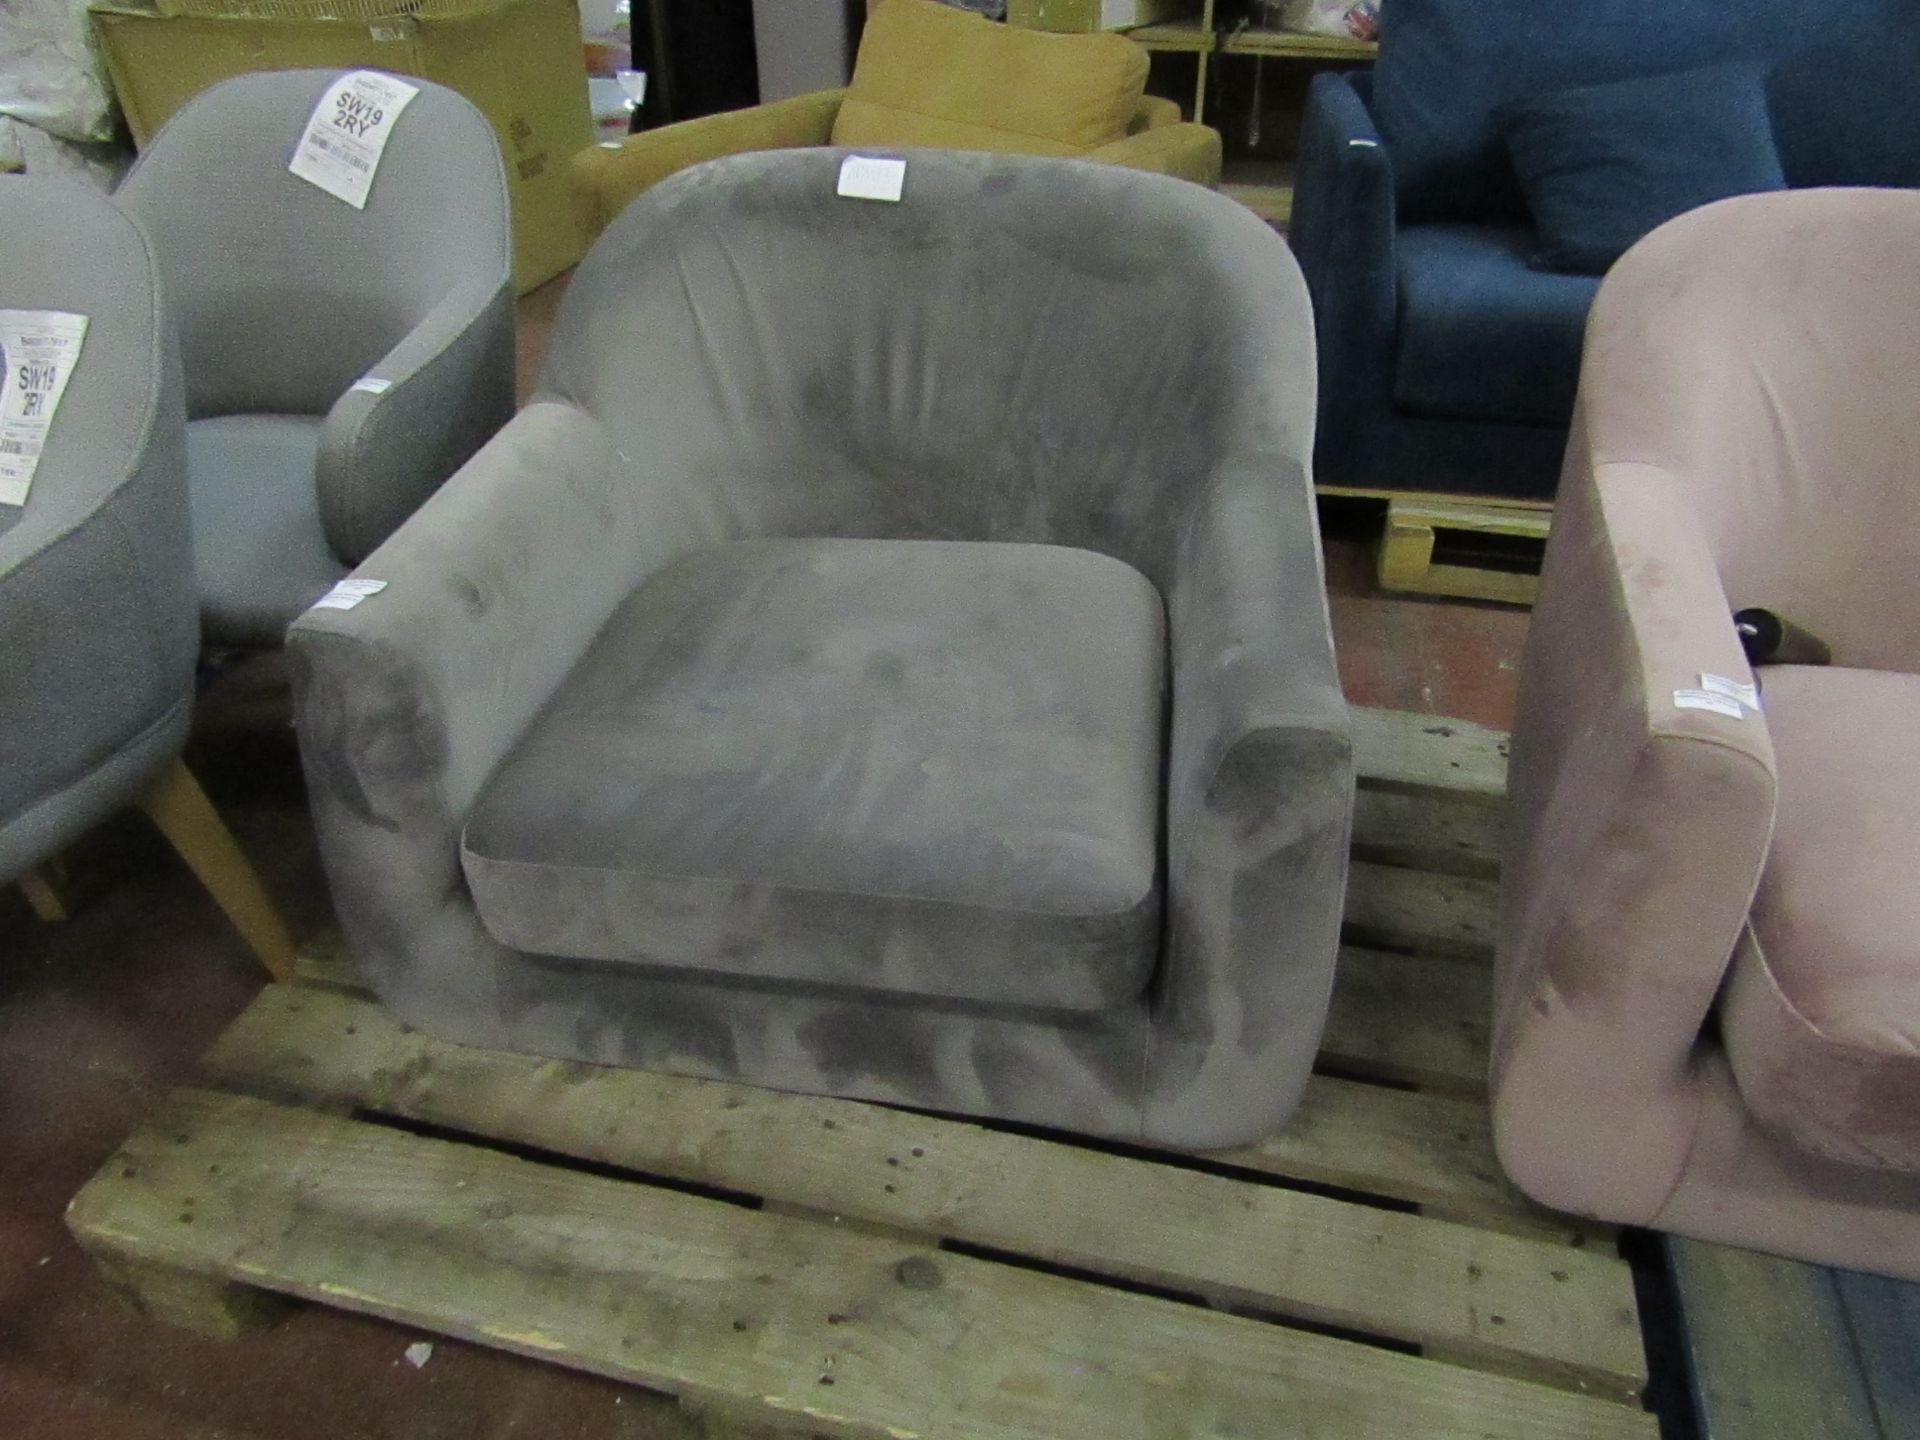 | 1X | MADE.COM VELVET TUB CHAIR | GOOD CONDITION BUT NO LEGS | GREY | RRP £299 |